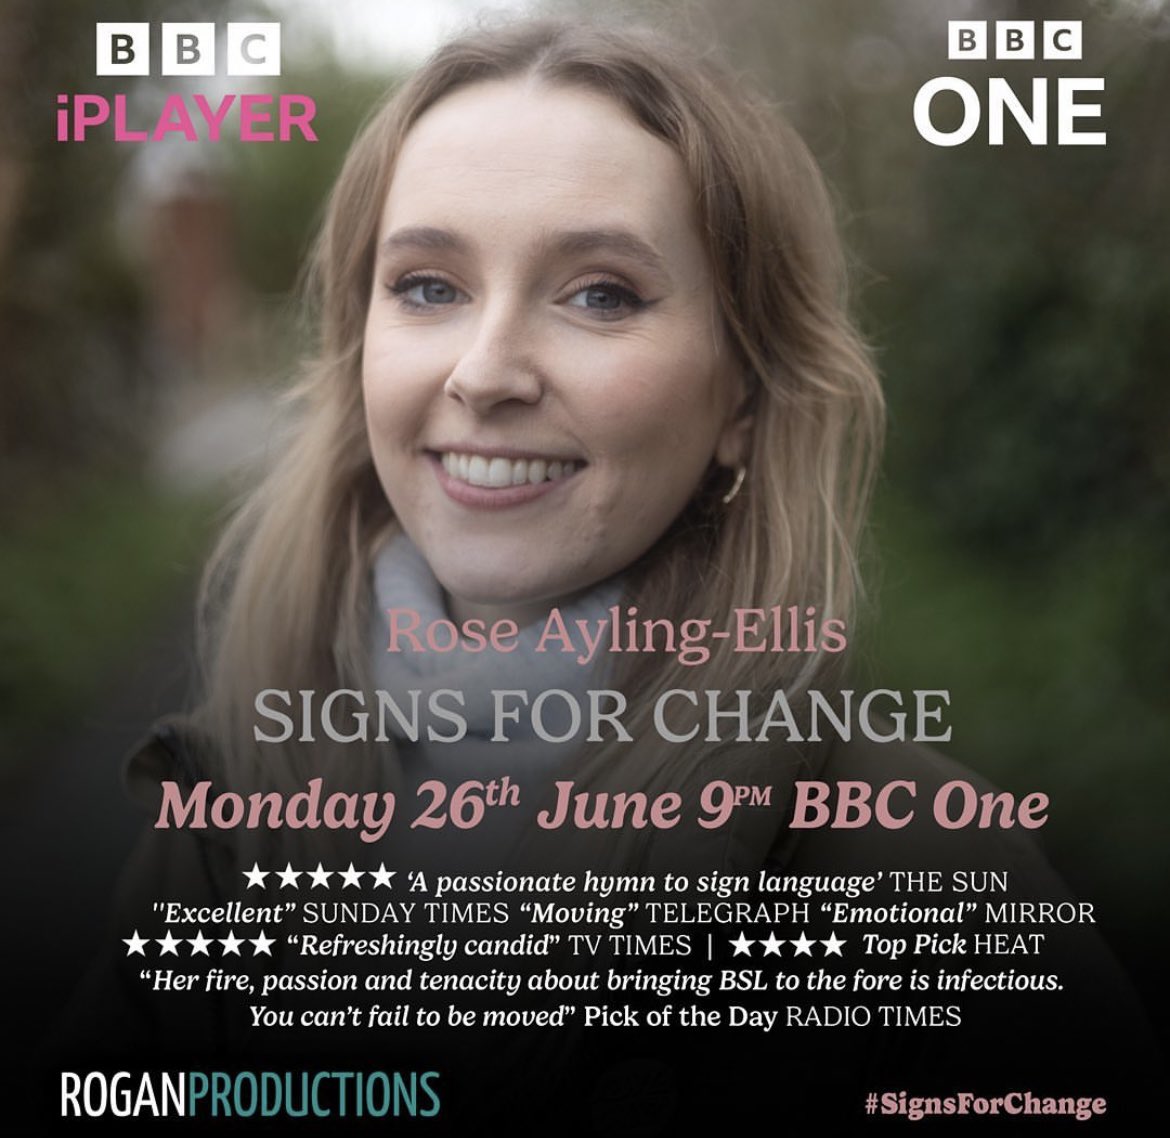 Hi please watch my film tonight, it’s called Signs for Change and it airs on BBC One at 9pm. #SignsForChange. @RishiSunak @OliverDowden @SteveBarclay @GillianKeegan @Keir_Starmer @AngelaRayner @wesstreeting @bphillipsonMP